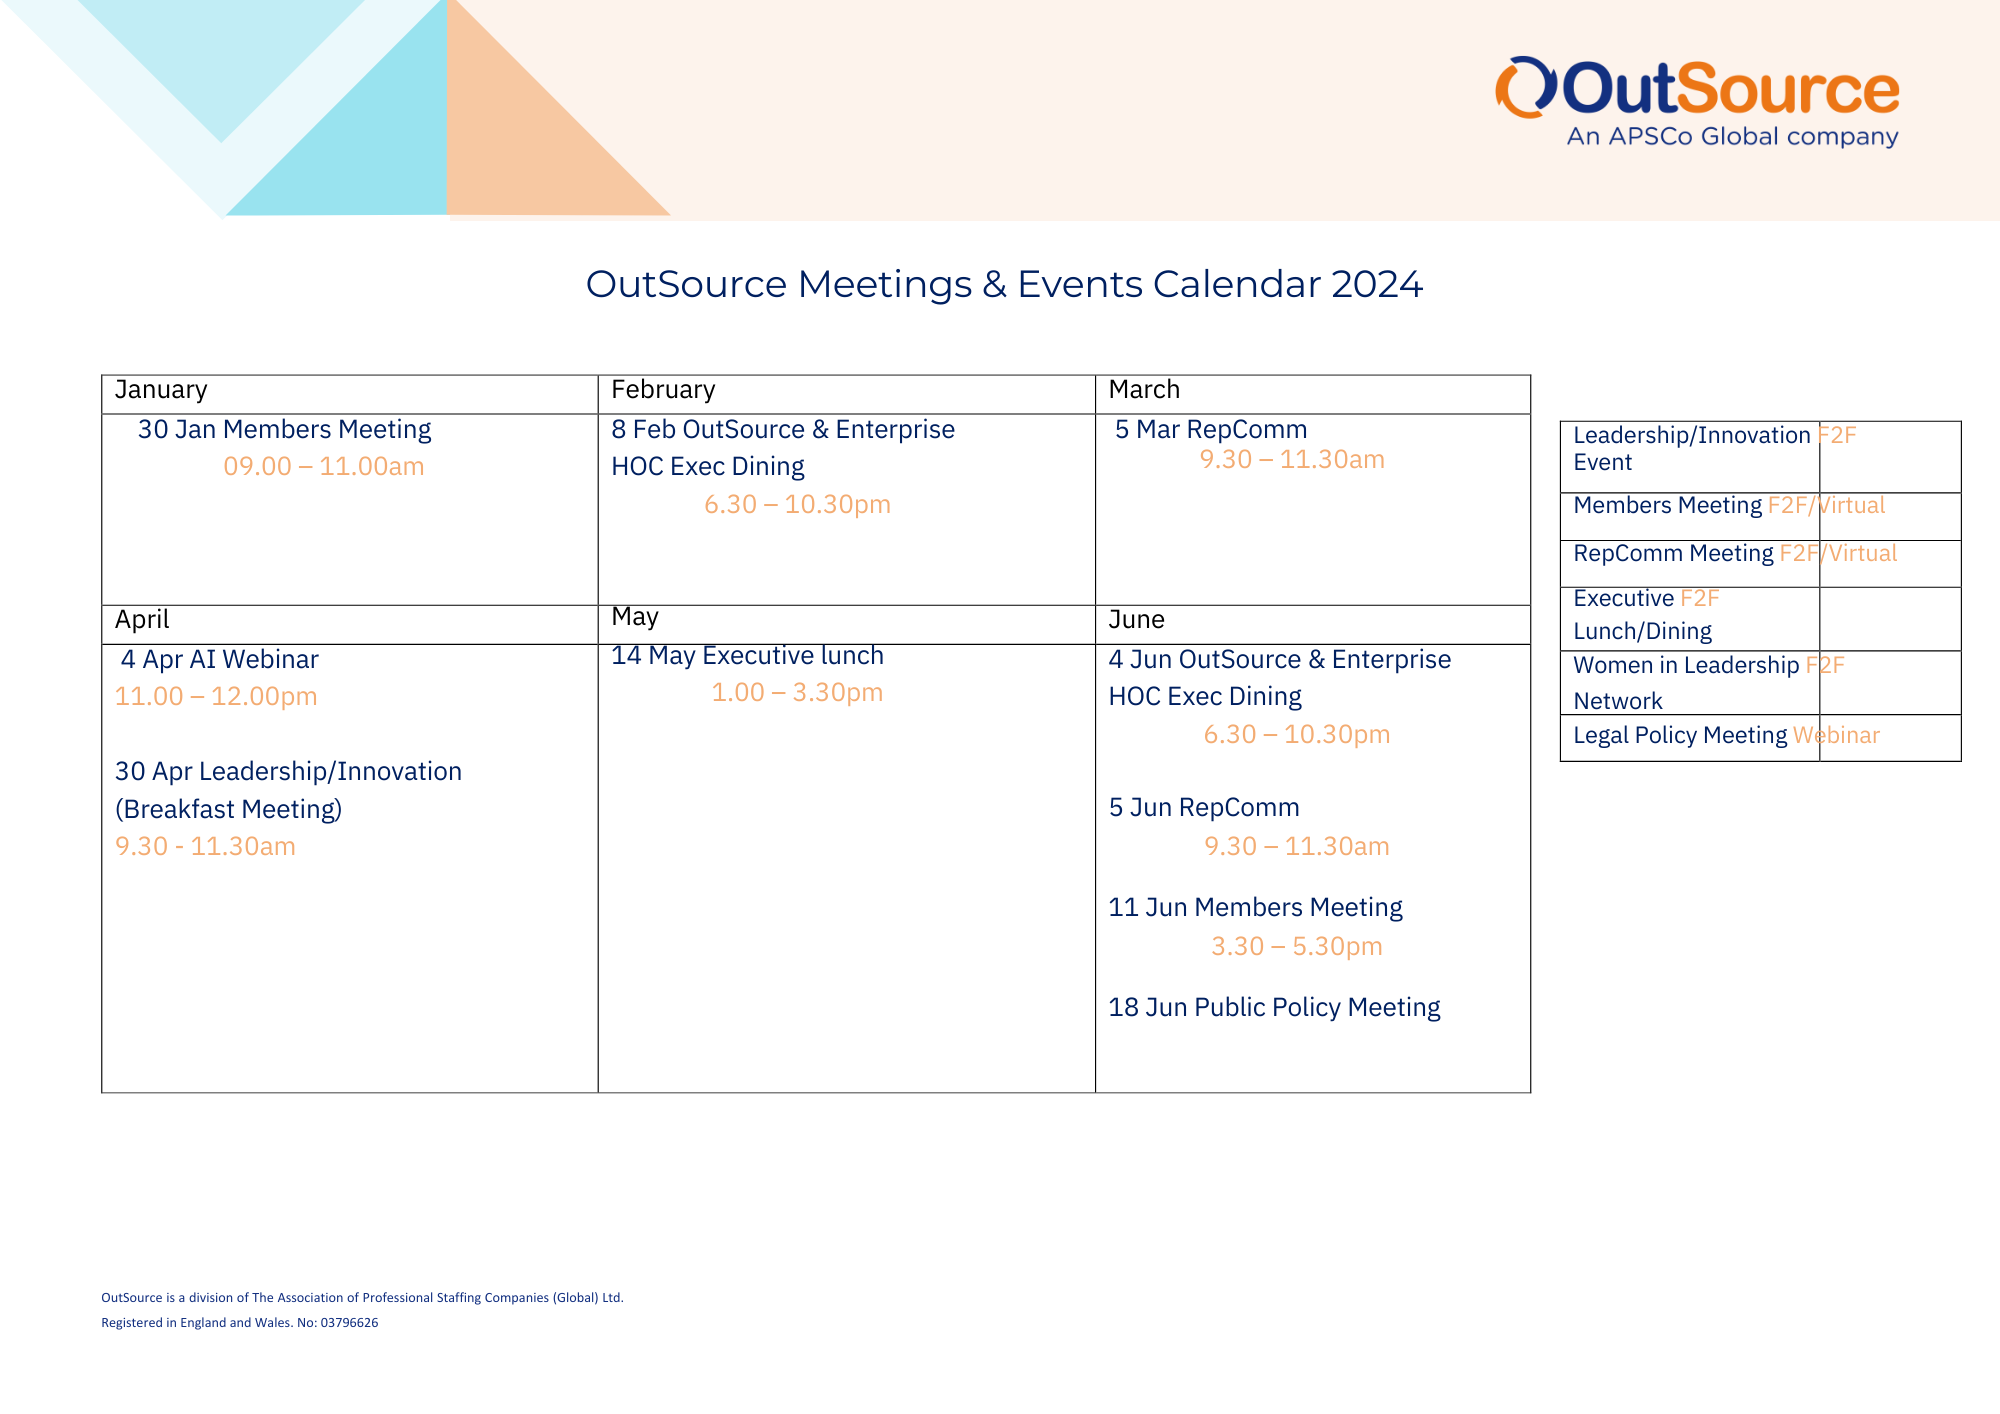 OutSource Meetings and Events Calendar 2024 (Q1Q2).pdf.png